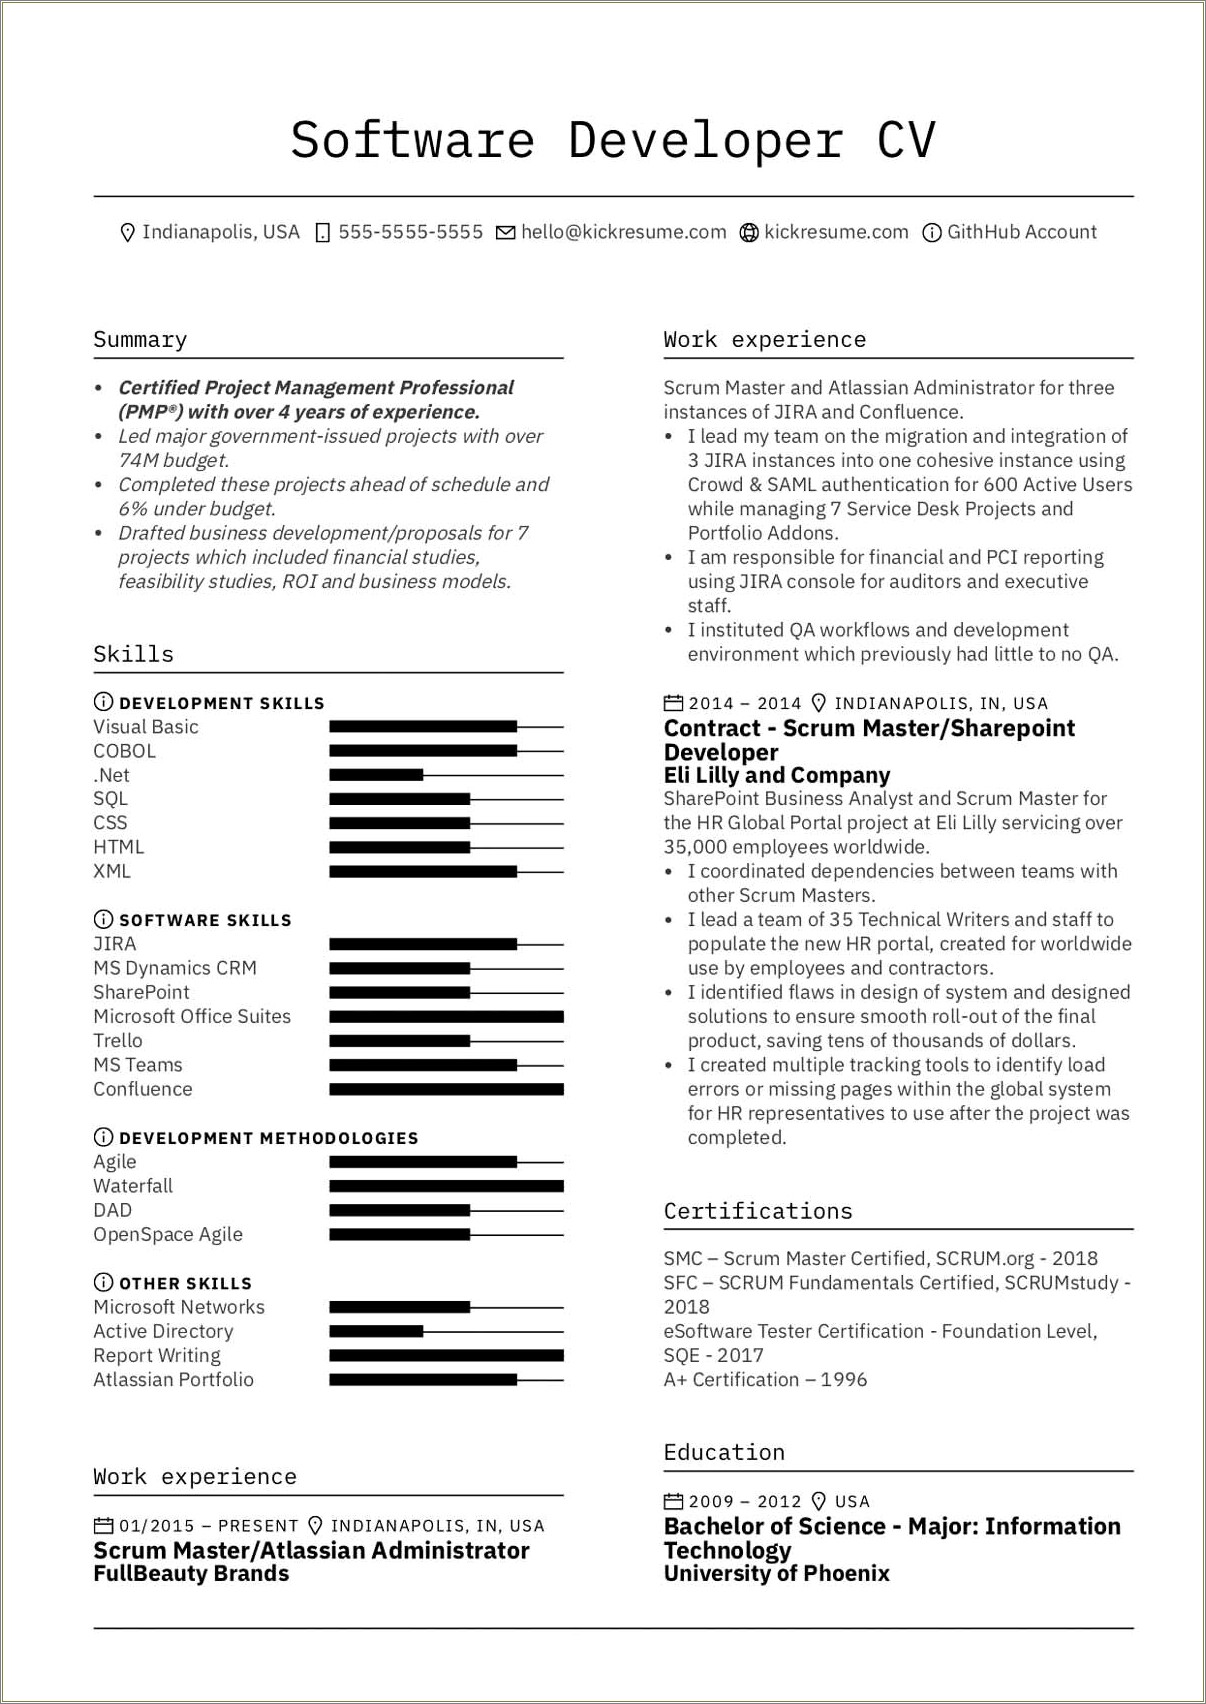 Example Personal Profile Resume Higher Education